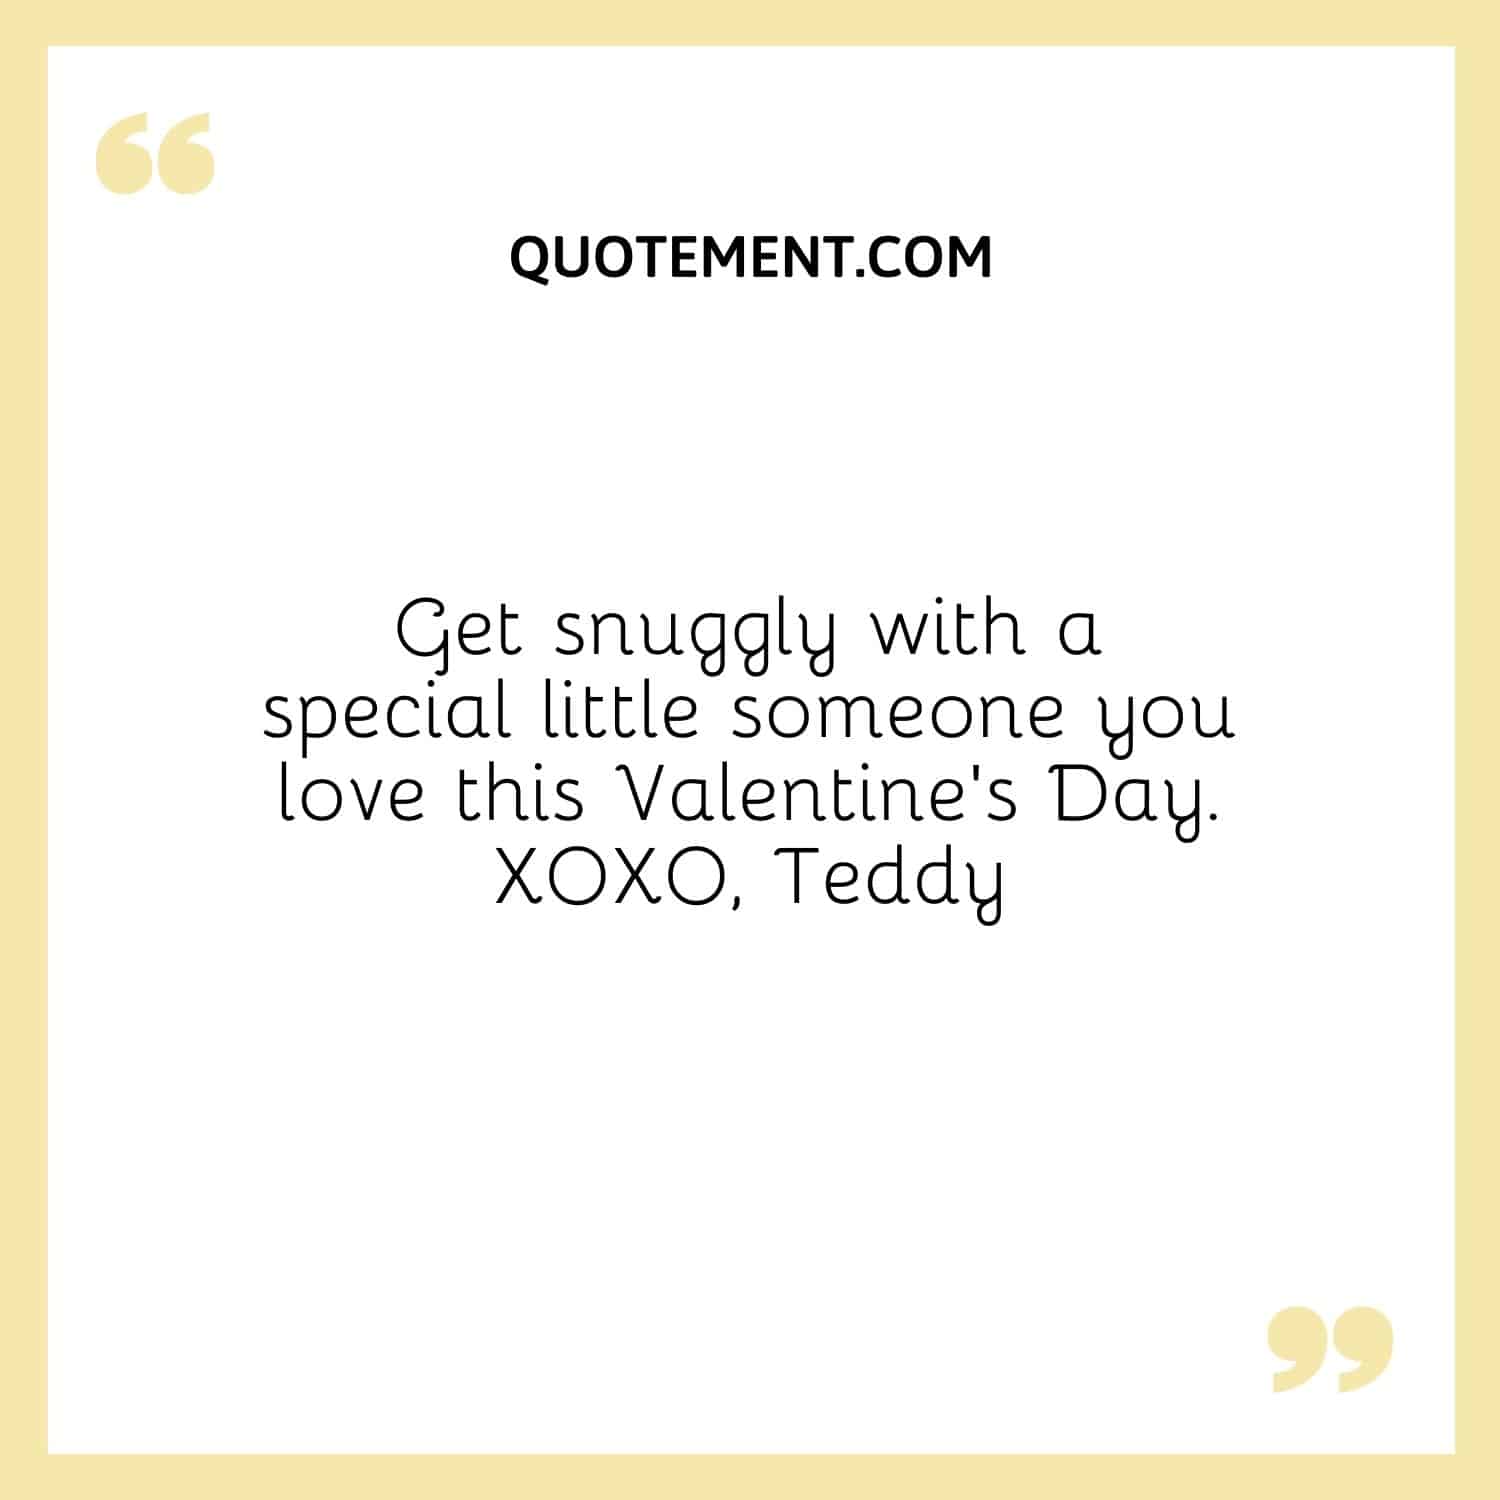 Get snuggly with a special little someone